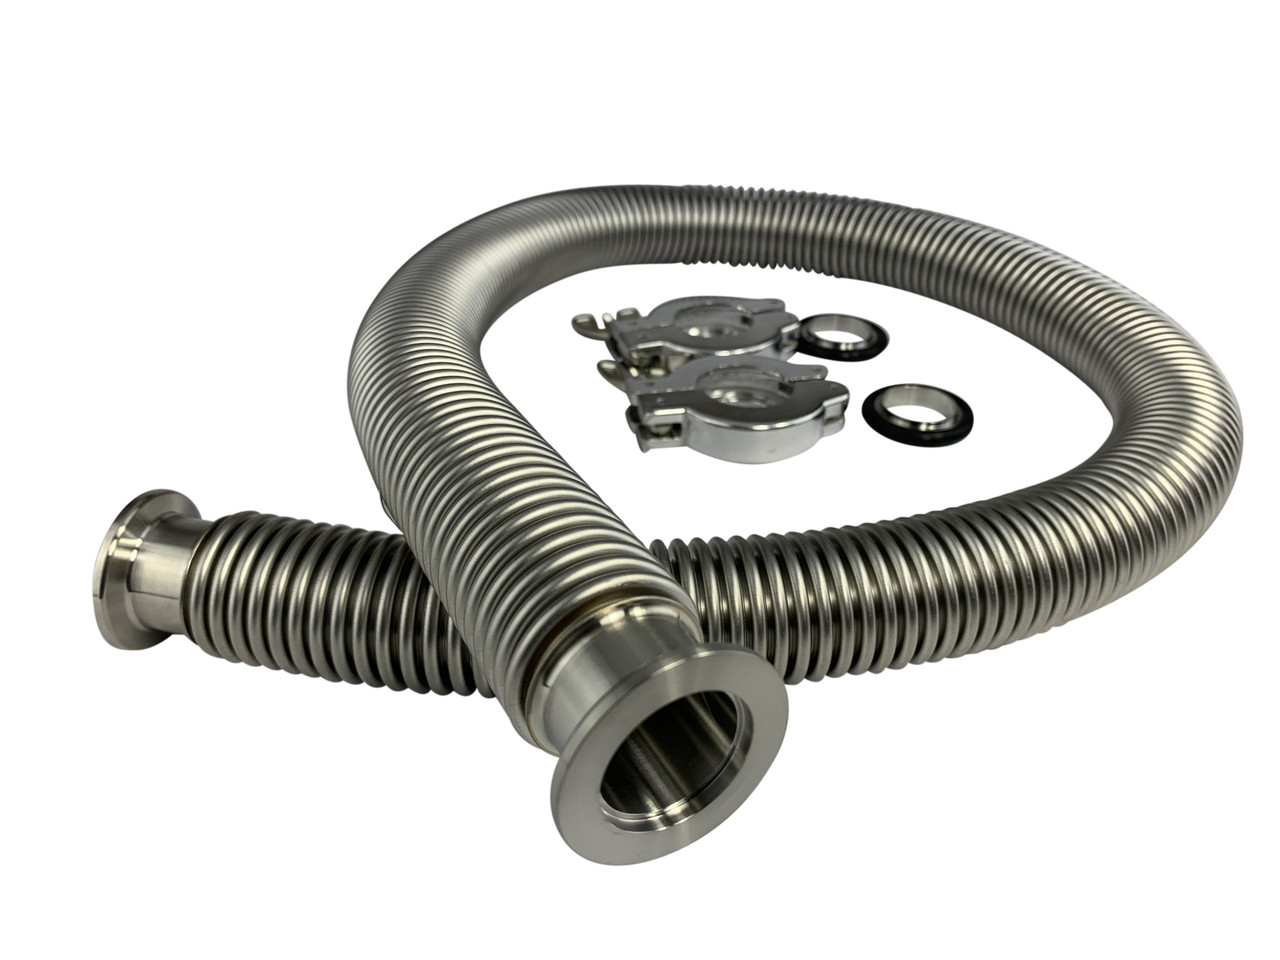 40" Thin-walled Stainless Bellow Vacuum Hose with NW25 Fittings Image 1